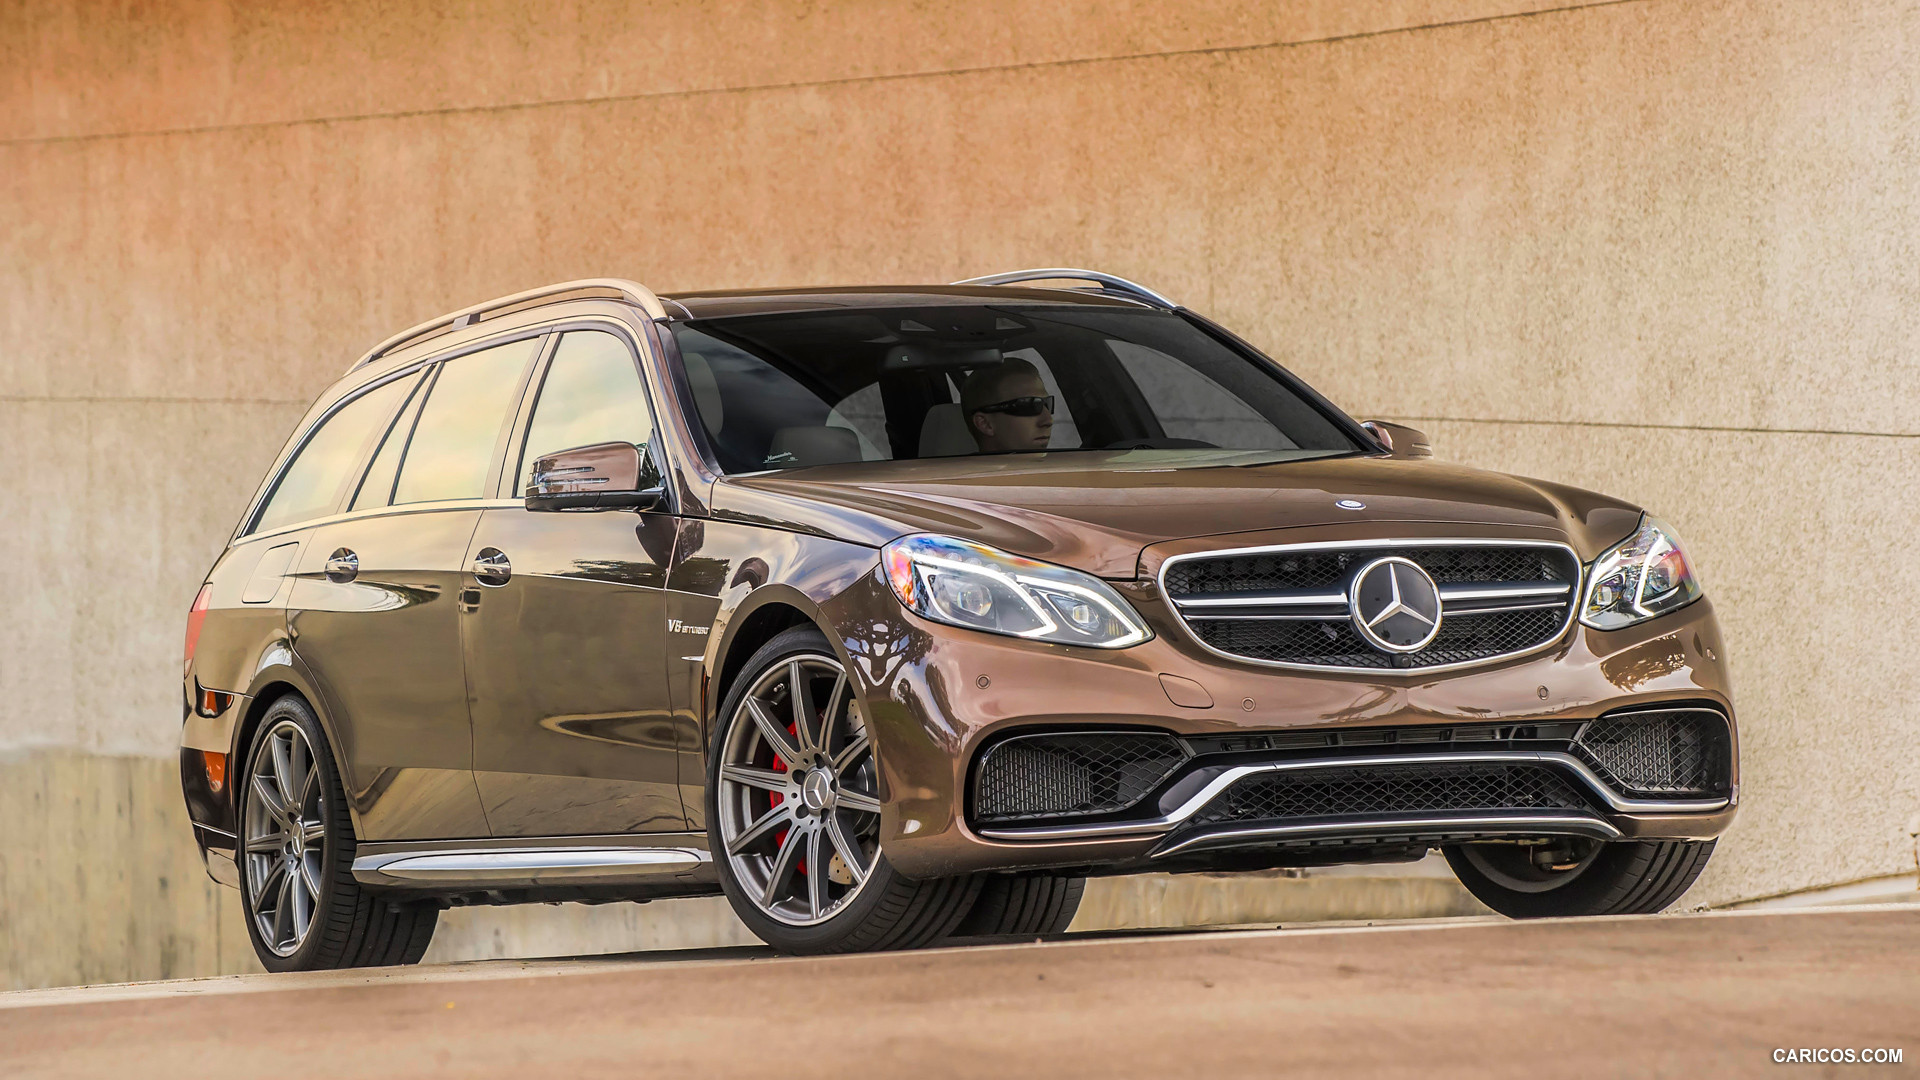  2014 Mercedes-Benz E 63 AMG S-Model Wagon (US Version) - Front, #18 of 27